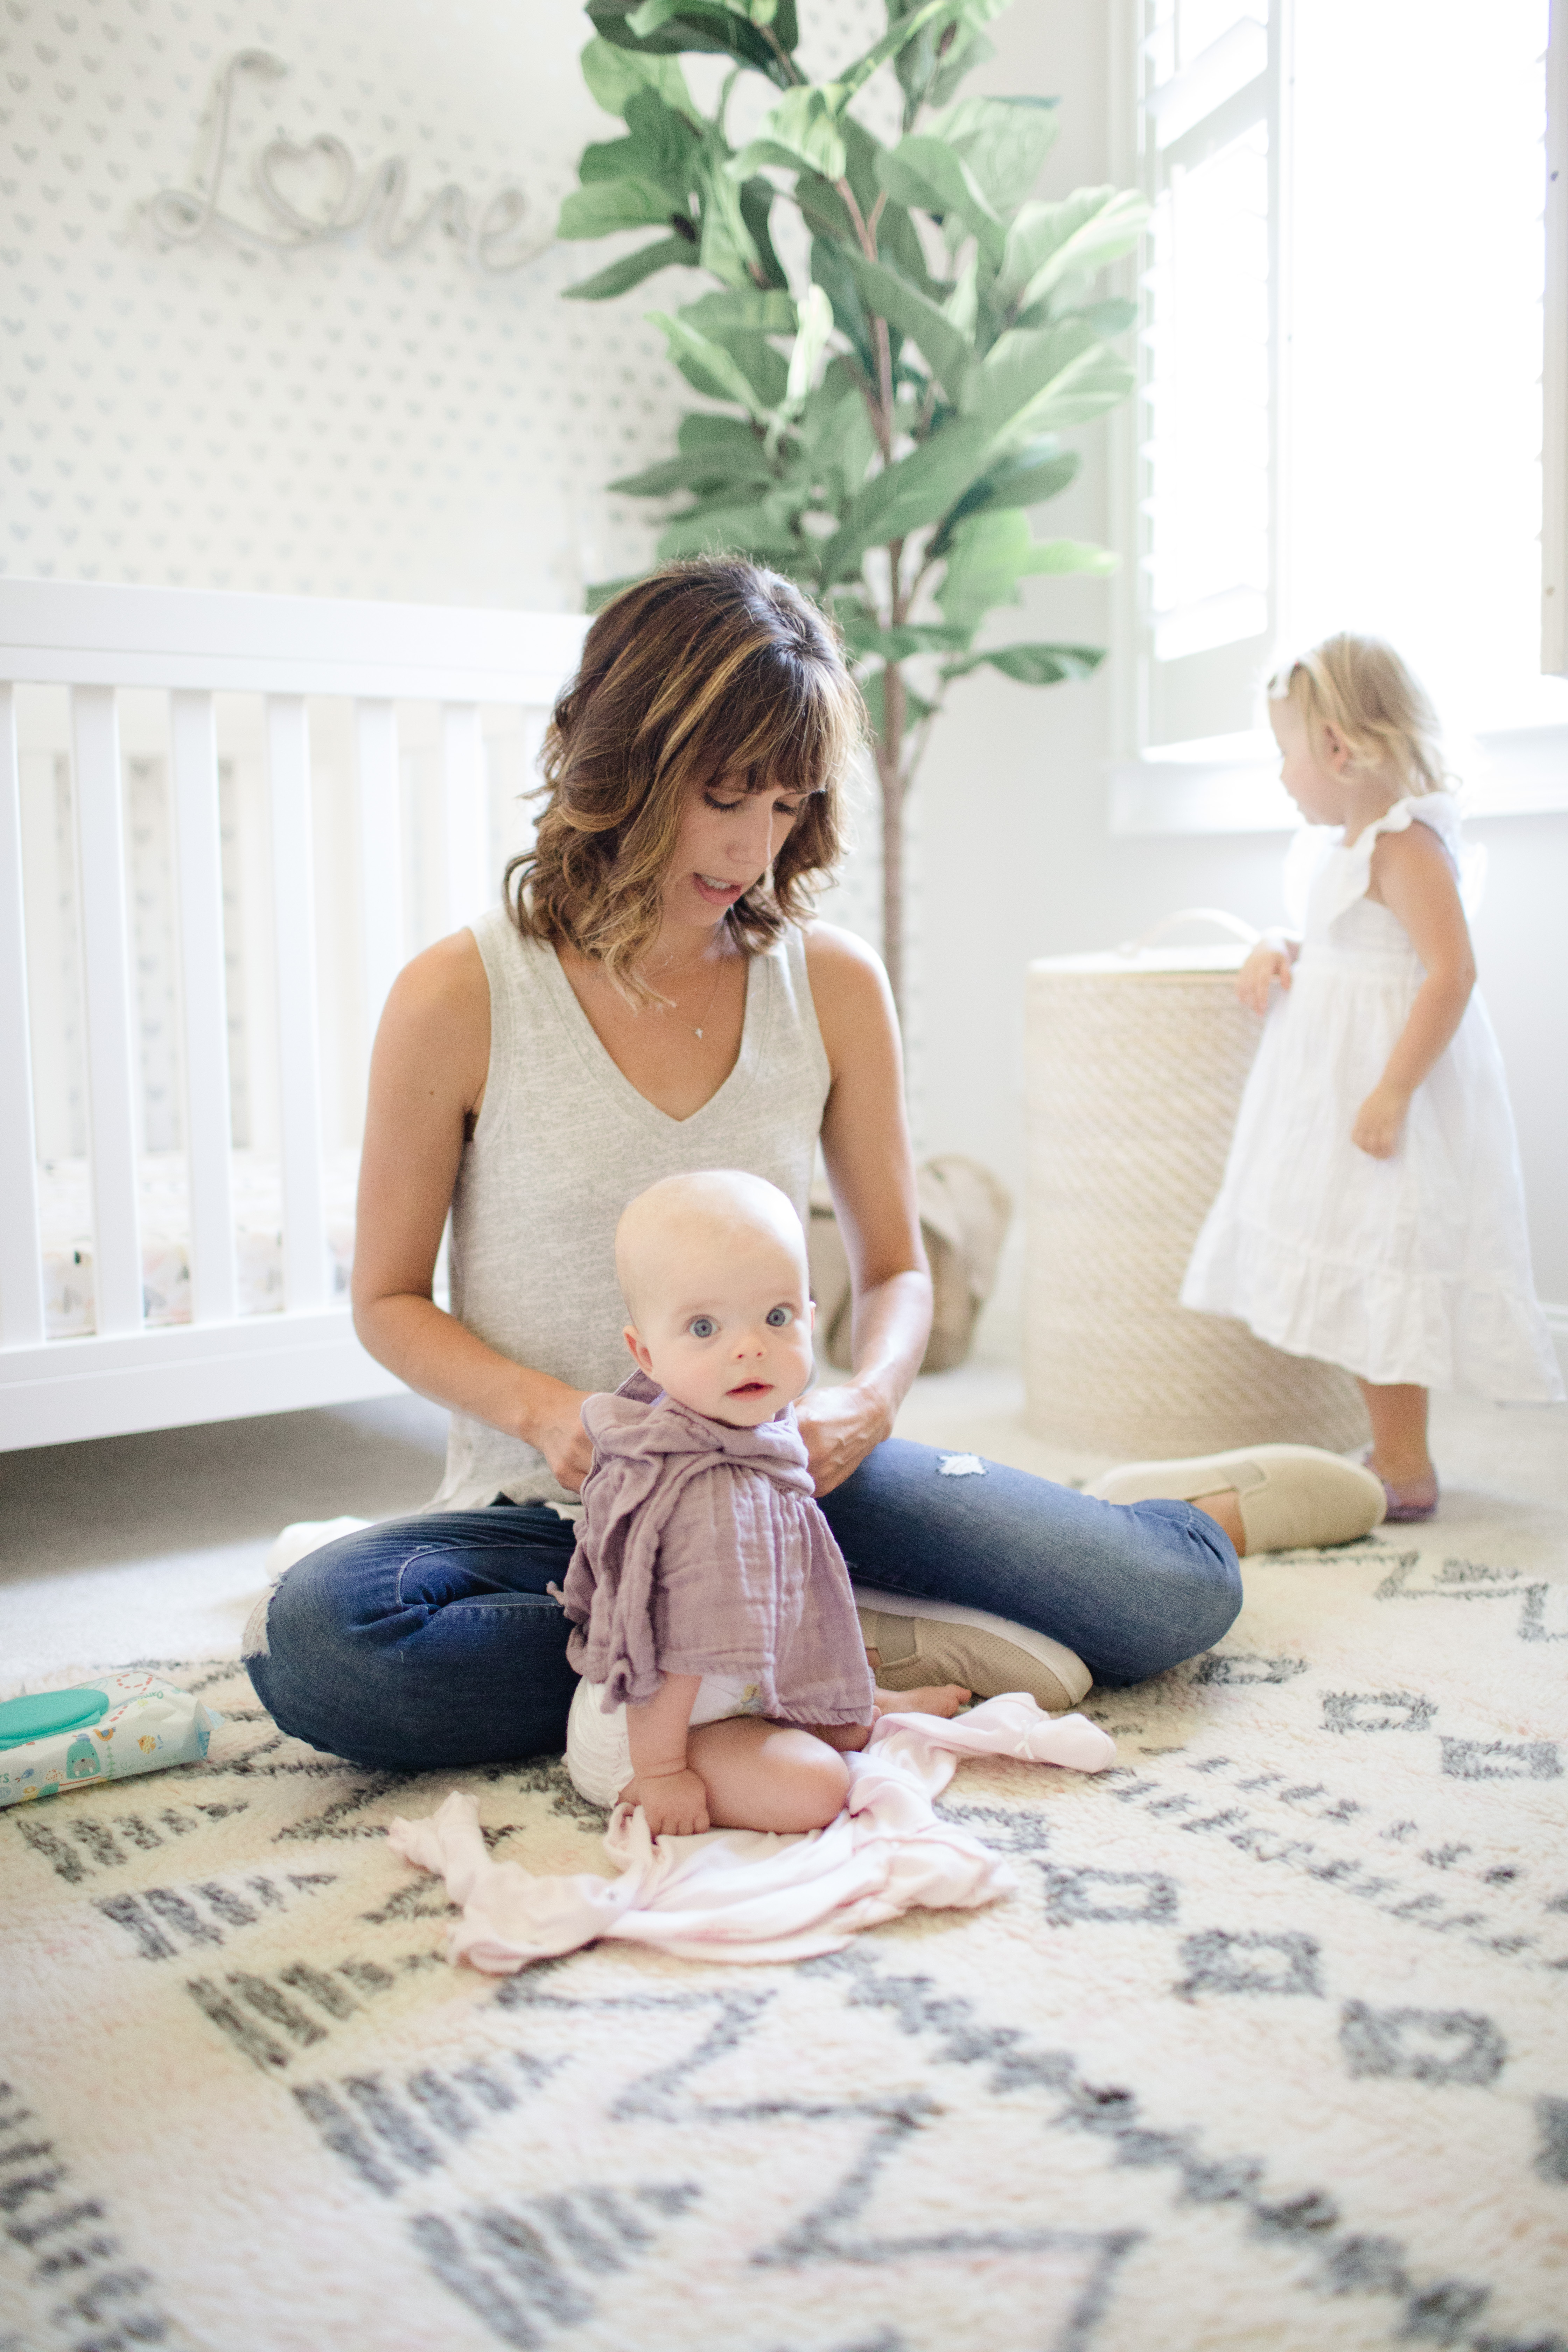 Motherhood really starts the moment you learn you're expecting. It also means motherhood anxiety kicks in. See how Motherhood and Lifestyle Blogger Meghan Basinger gives her real take on how Motherhood.